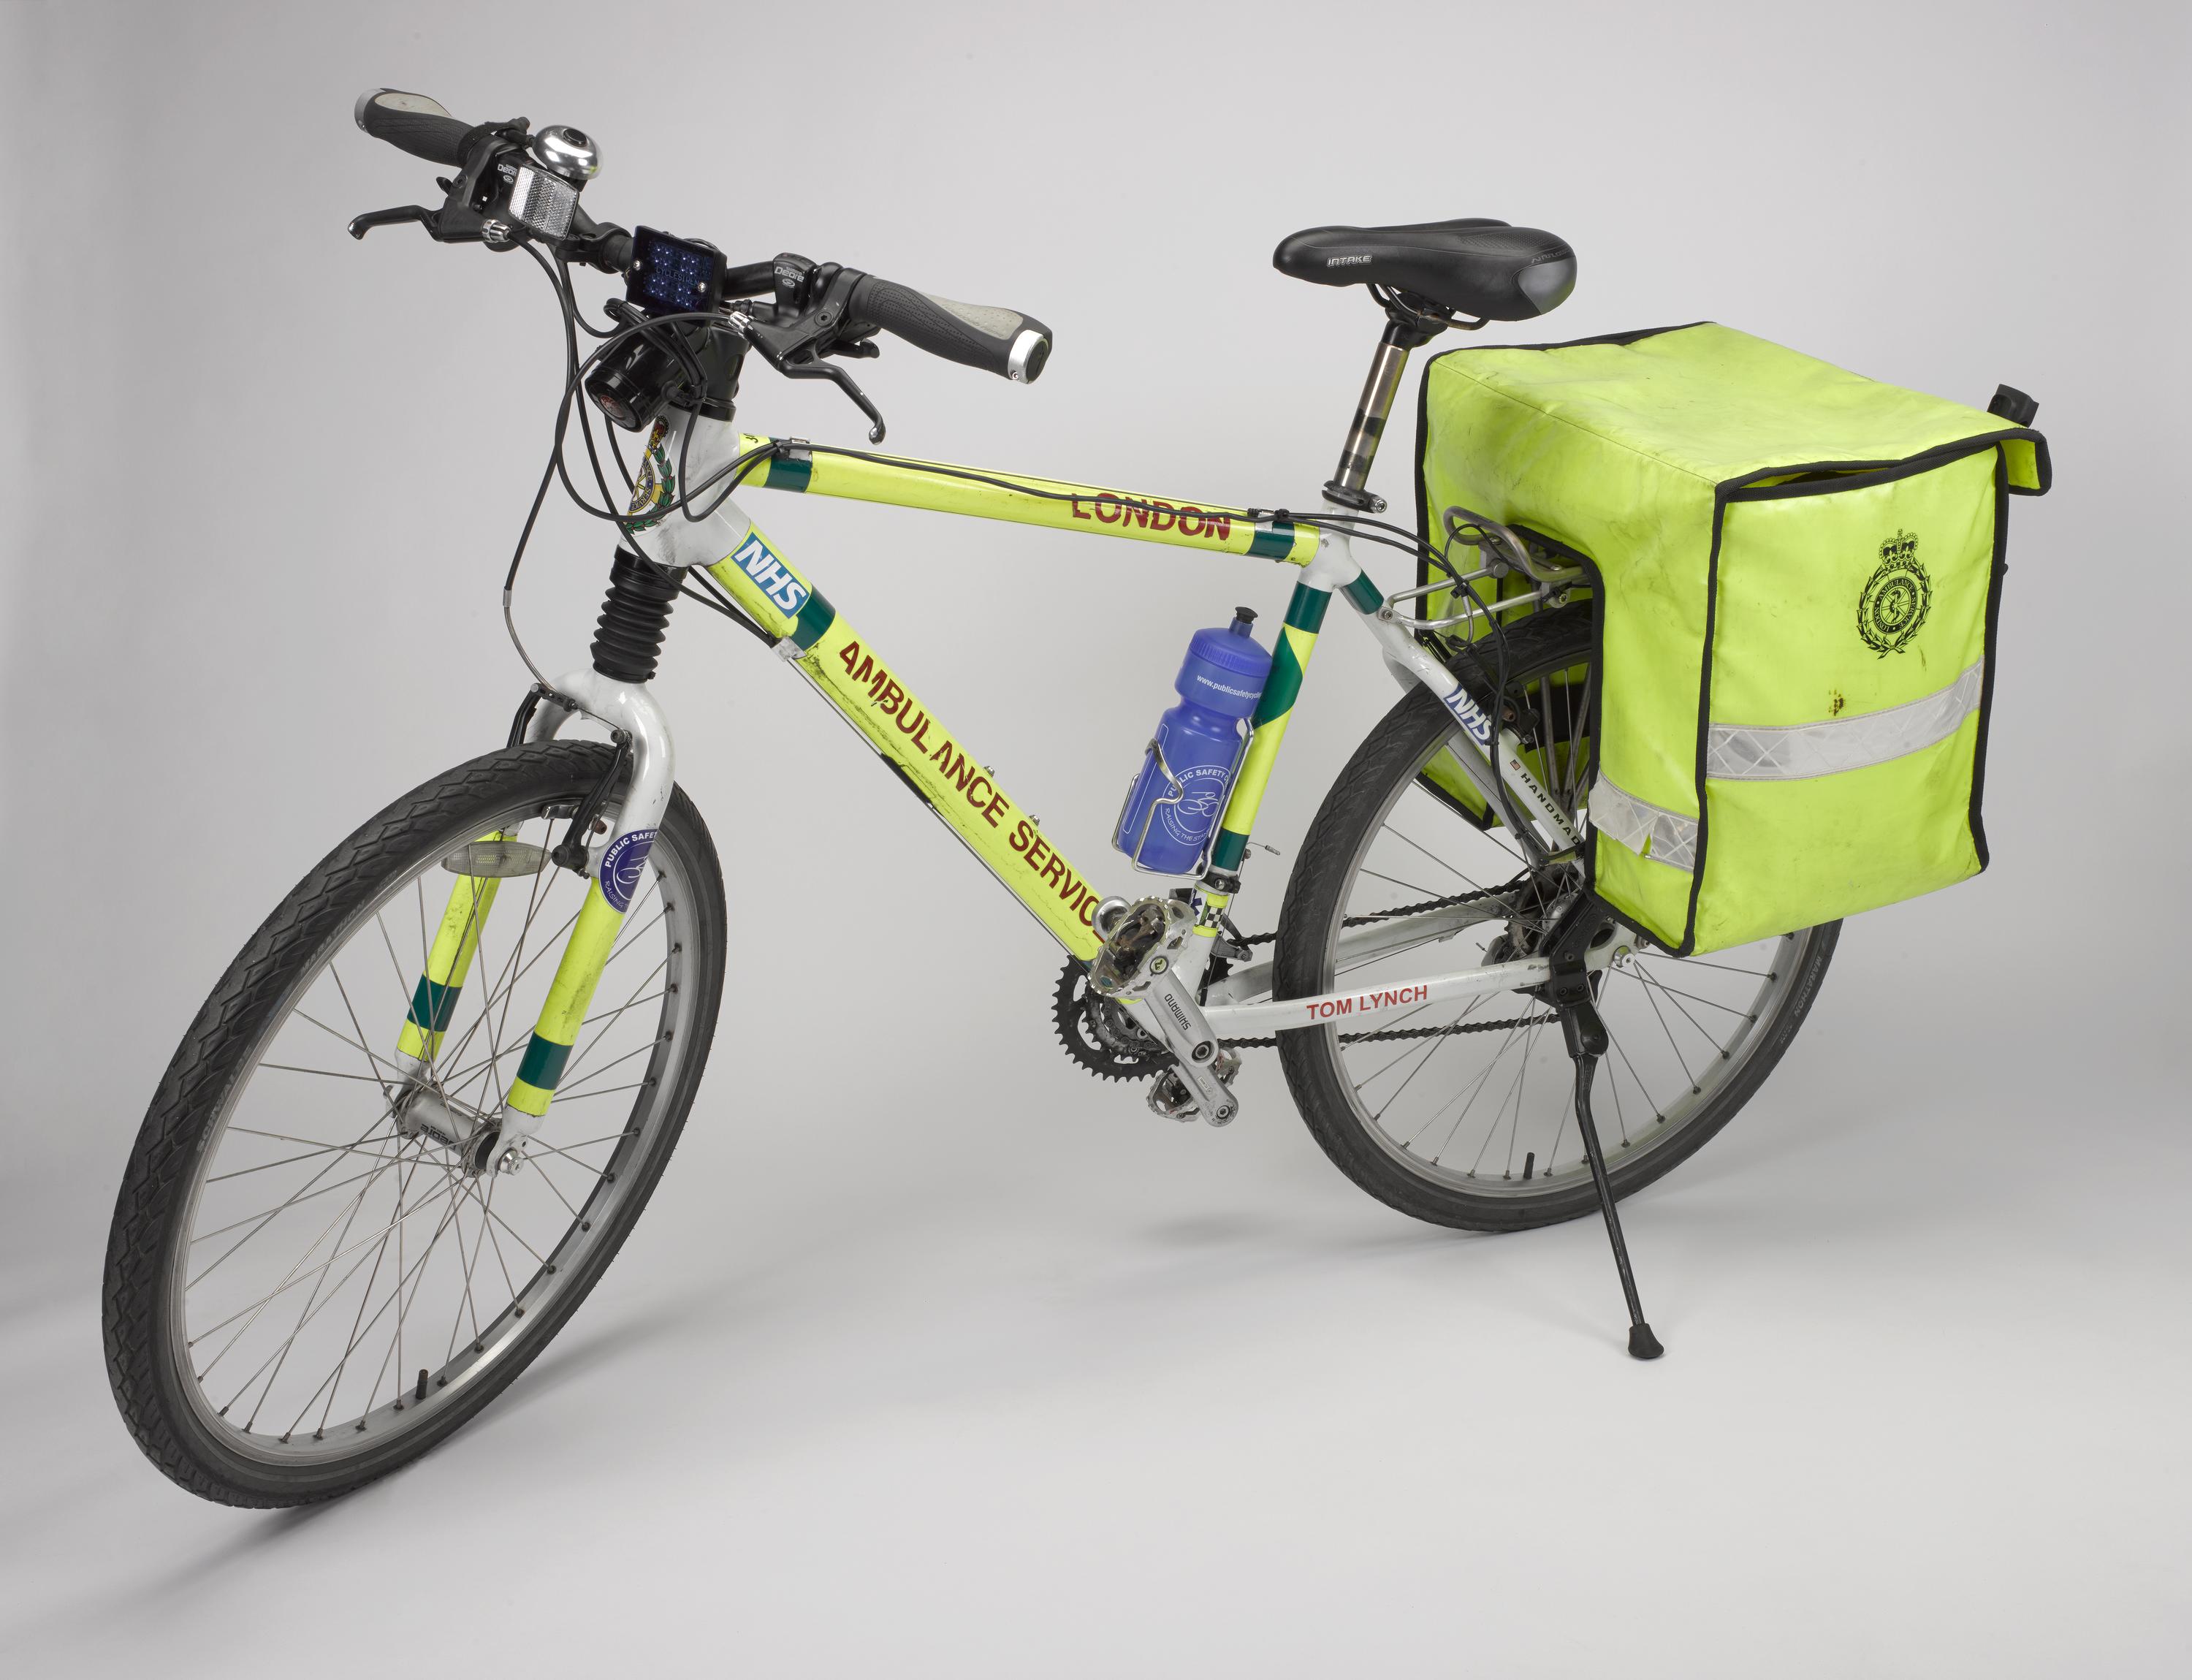 Paramedic bicycle used in the trial and development of London's Ambulance Cycle Response Unit by Tom Lynch MBE, early 2000s